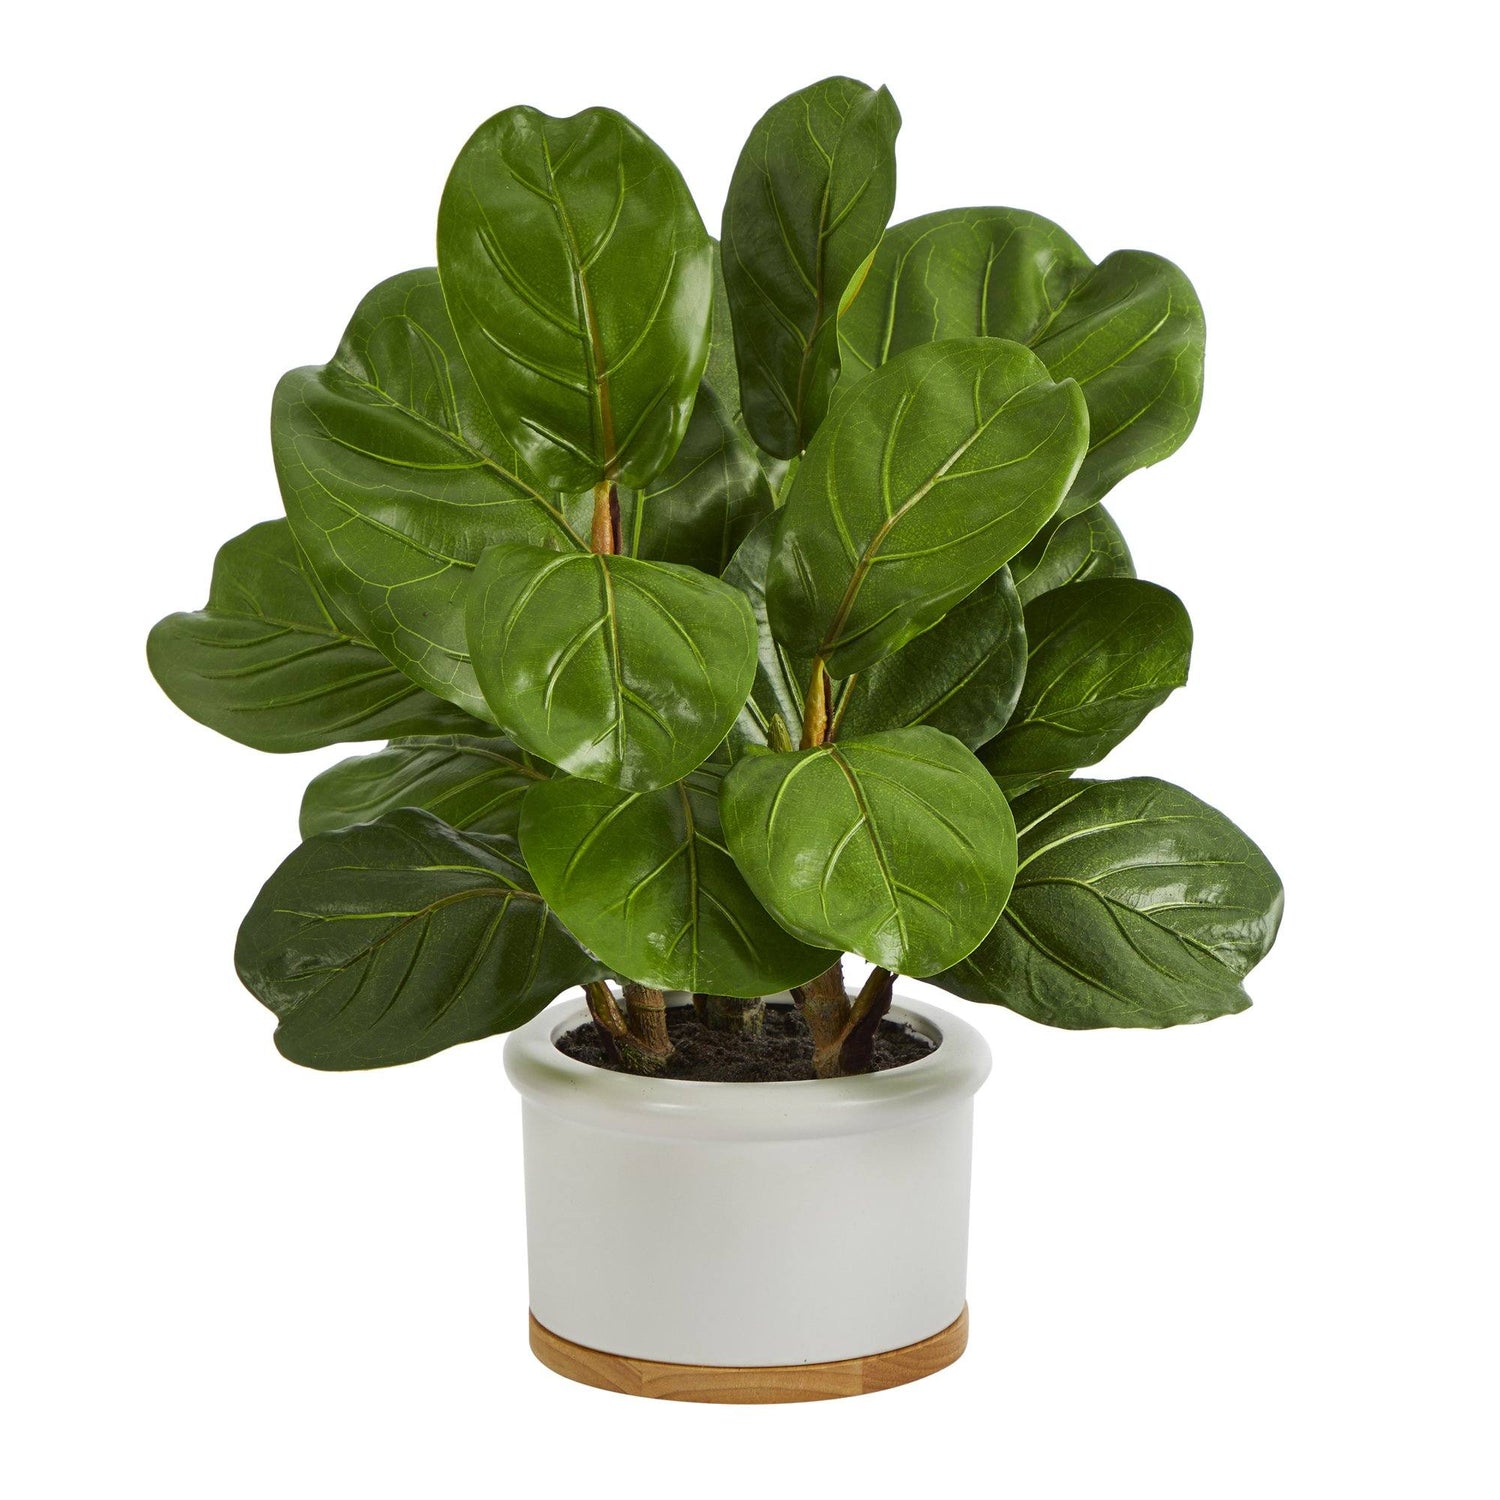 15” Fiddle Leaf Artificial Tree in White Planter